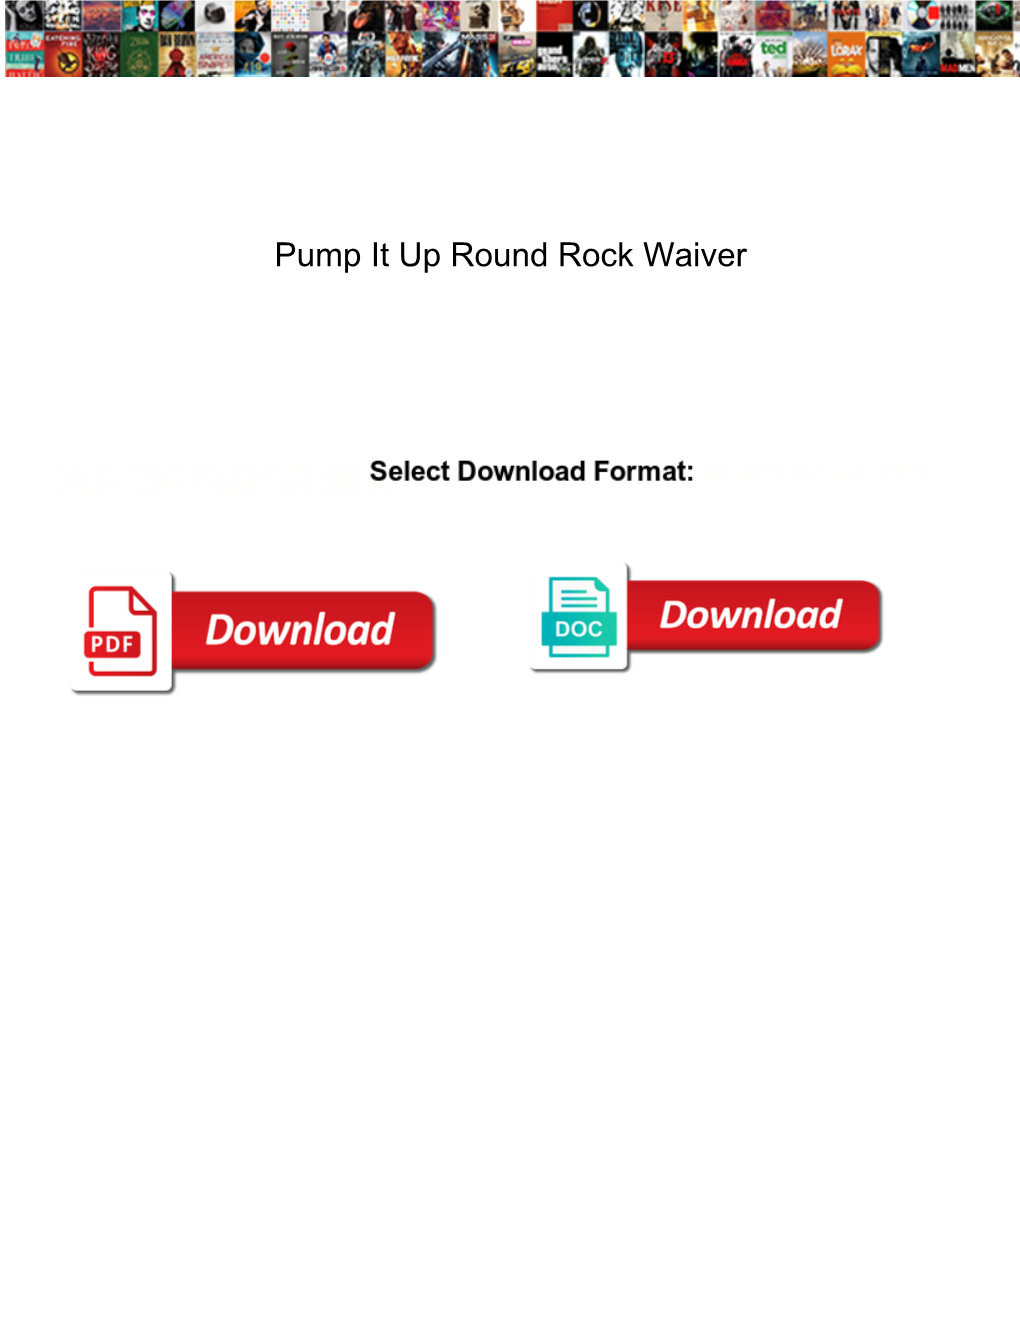 Pump It up Round Rock Waiver